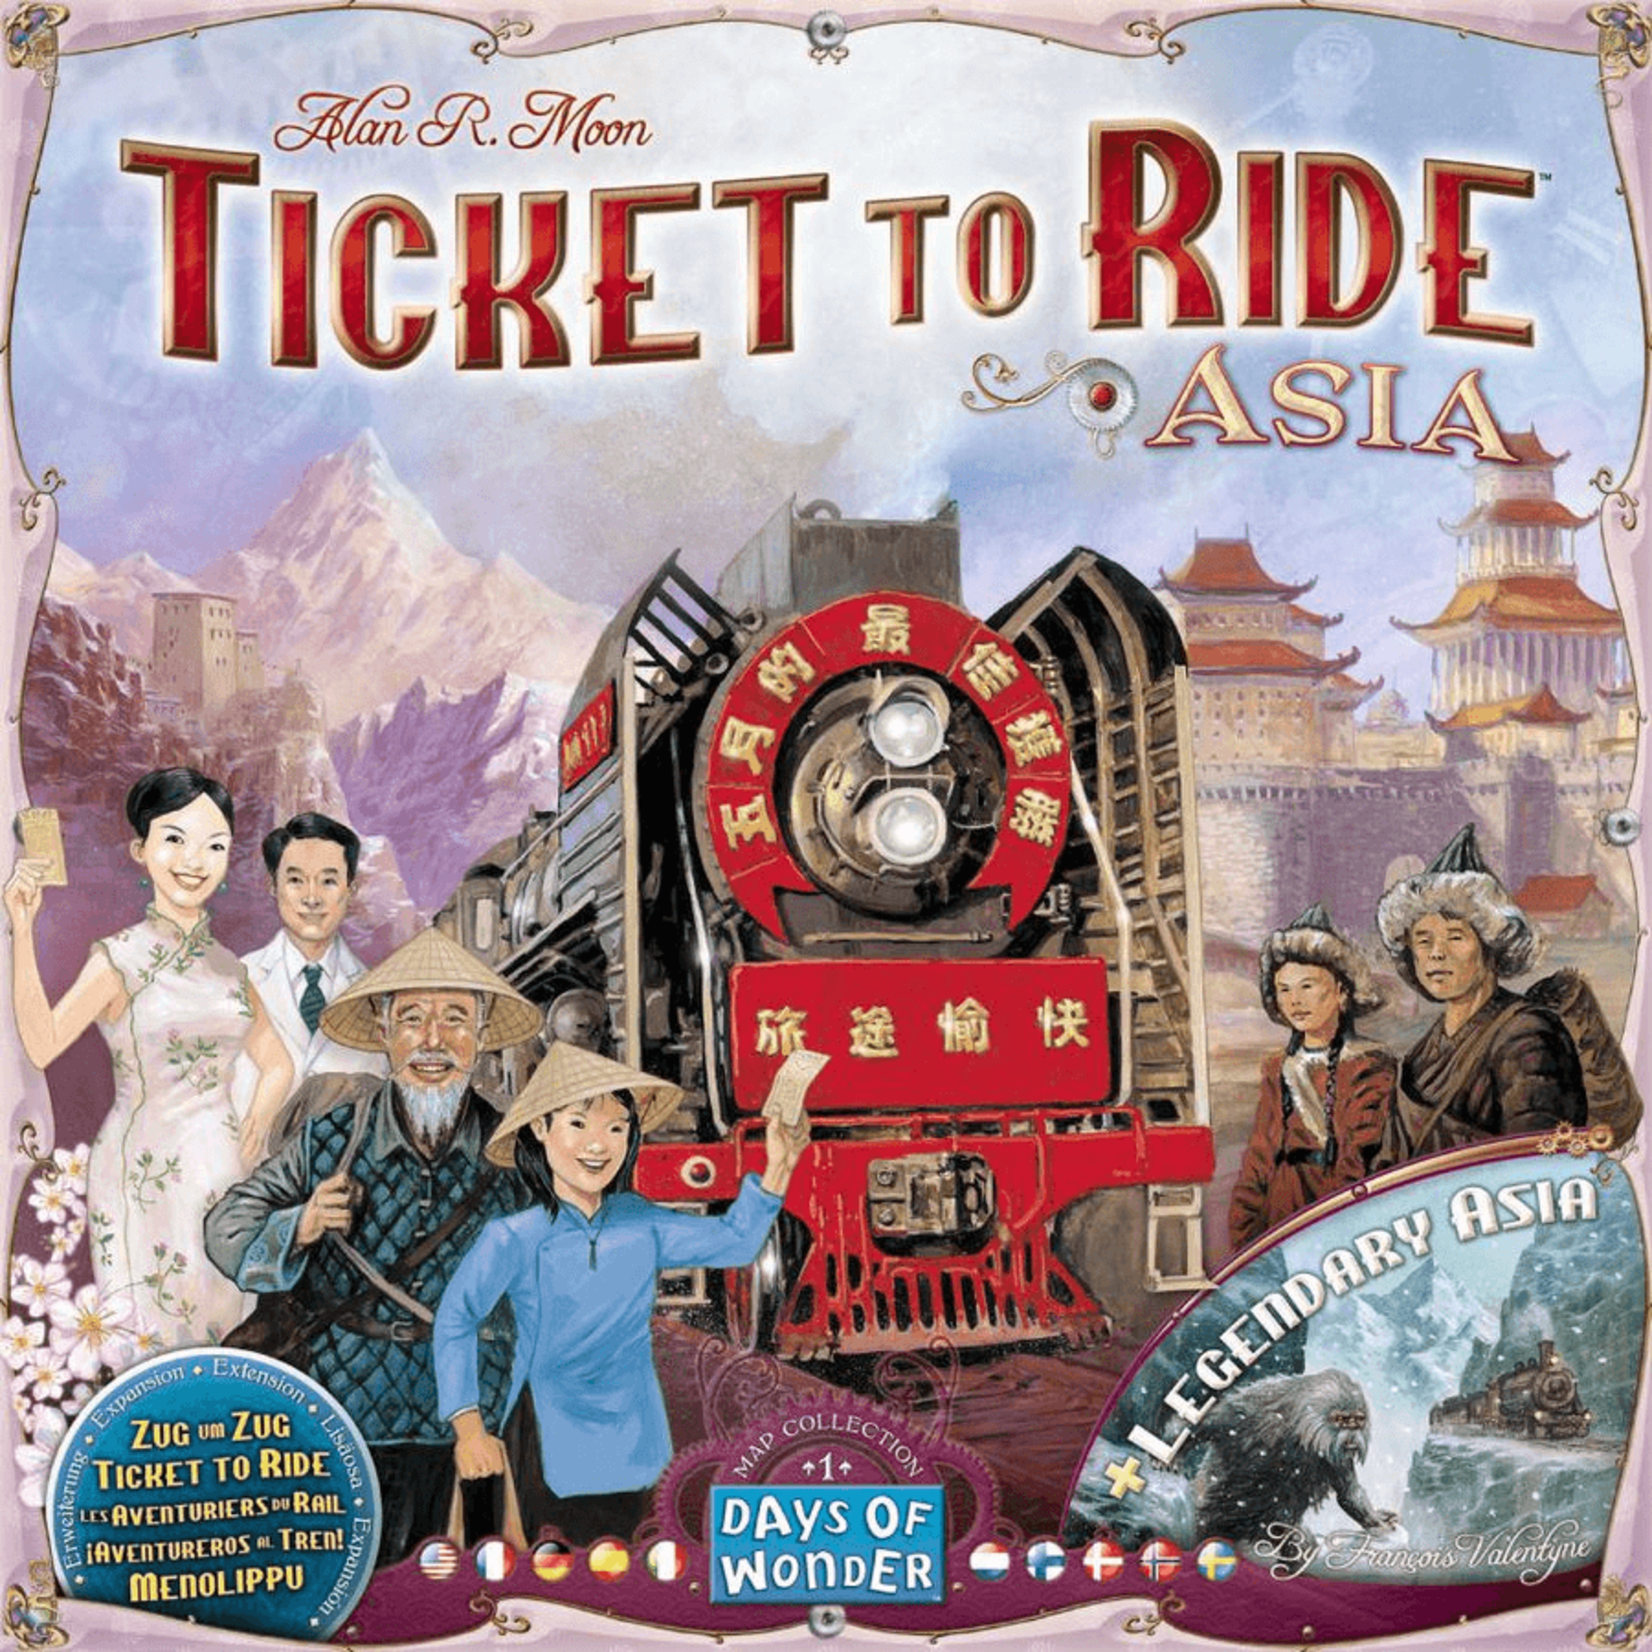 TICKET TO RIDE